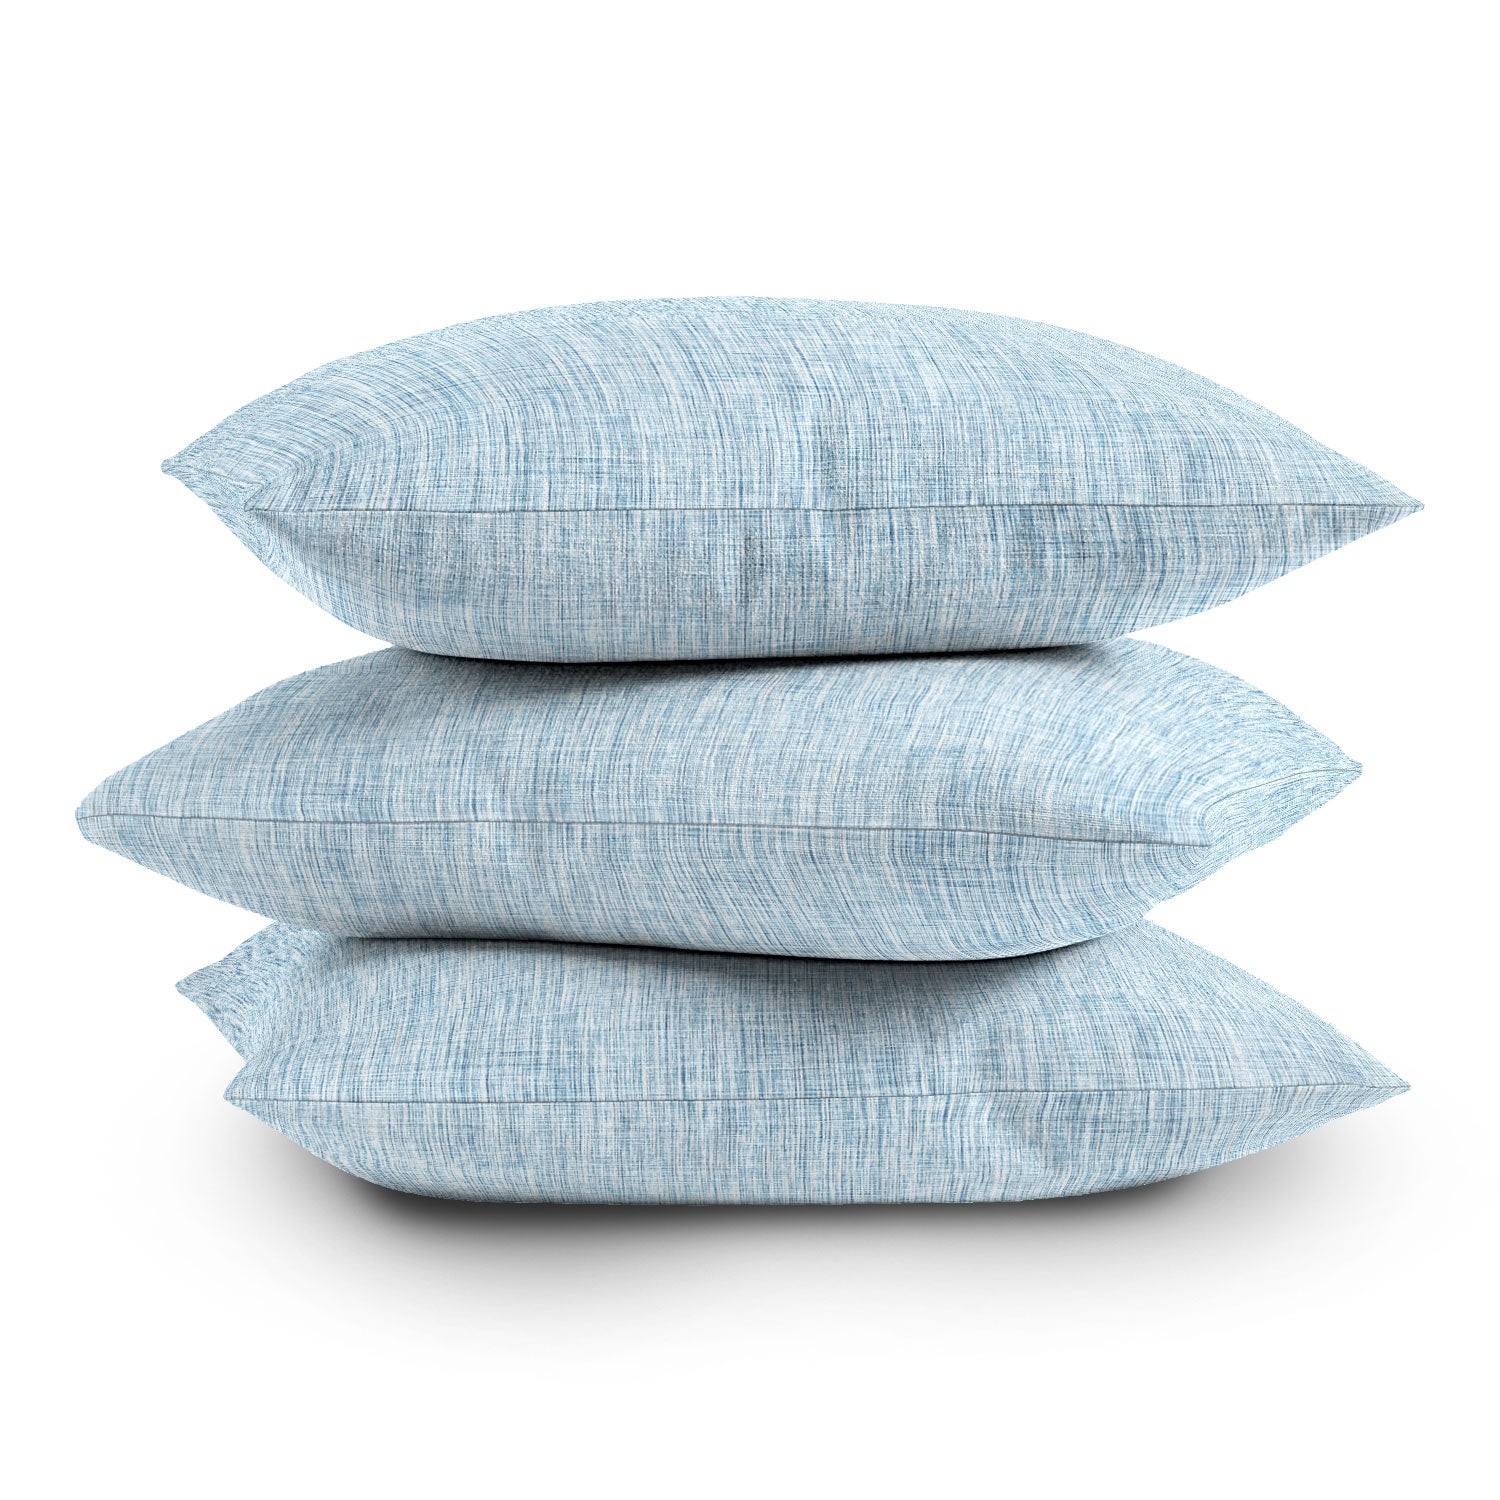 Linen Acid-Wash Throw Pillow with insert, Blue, 20" x 20" - Image 3